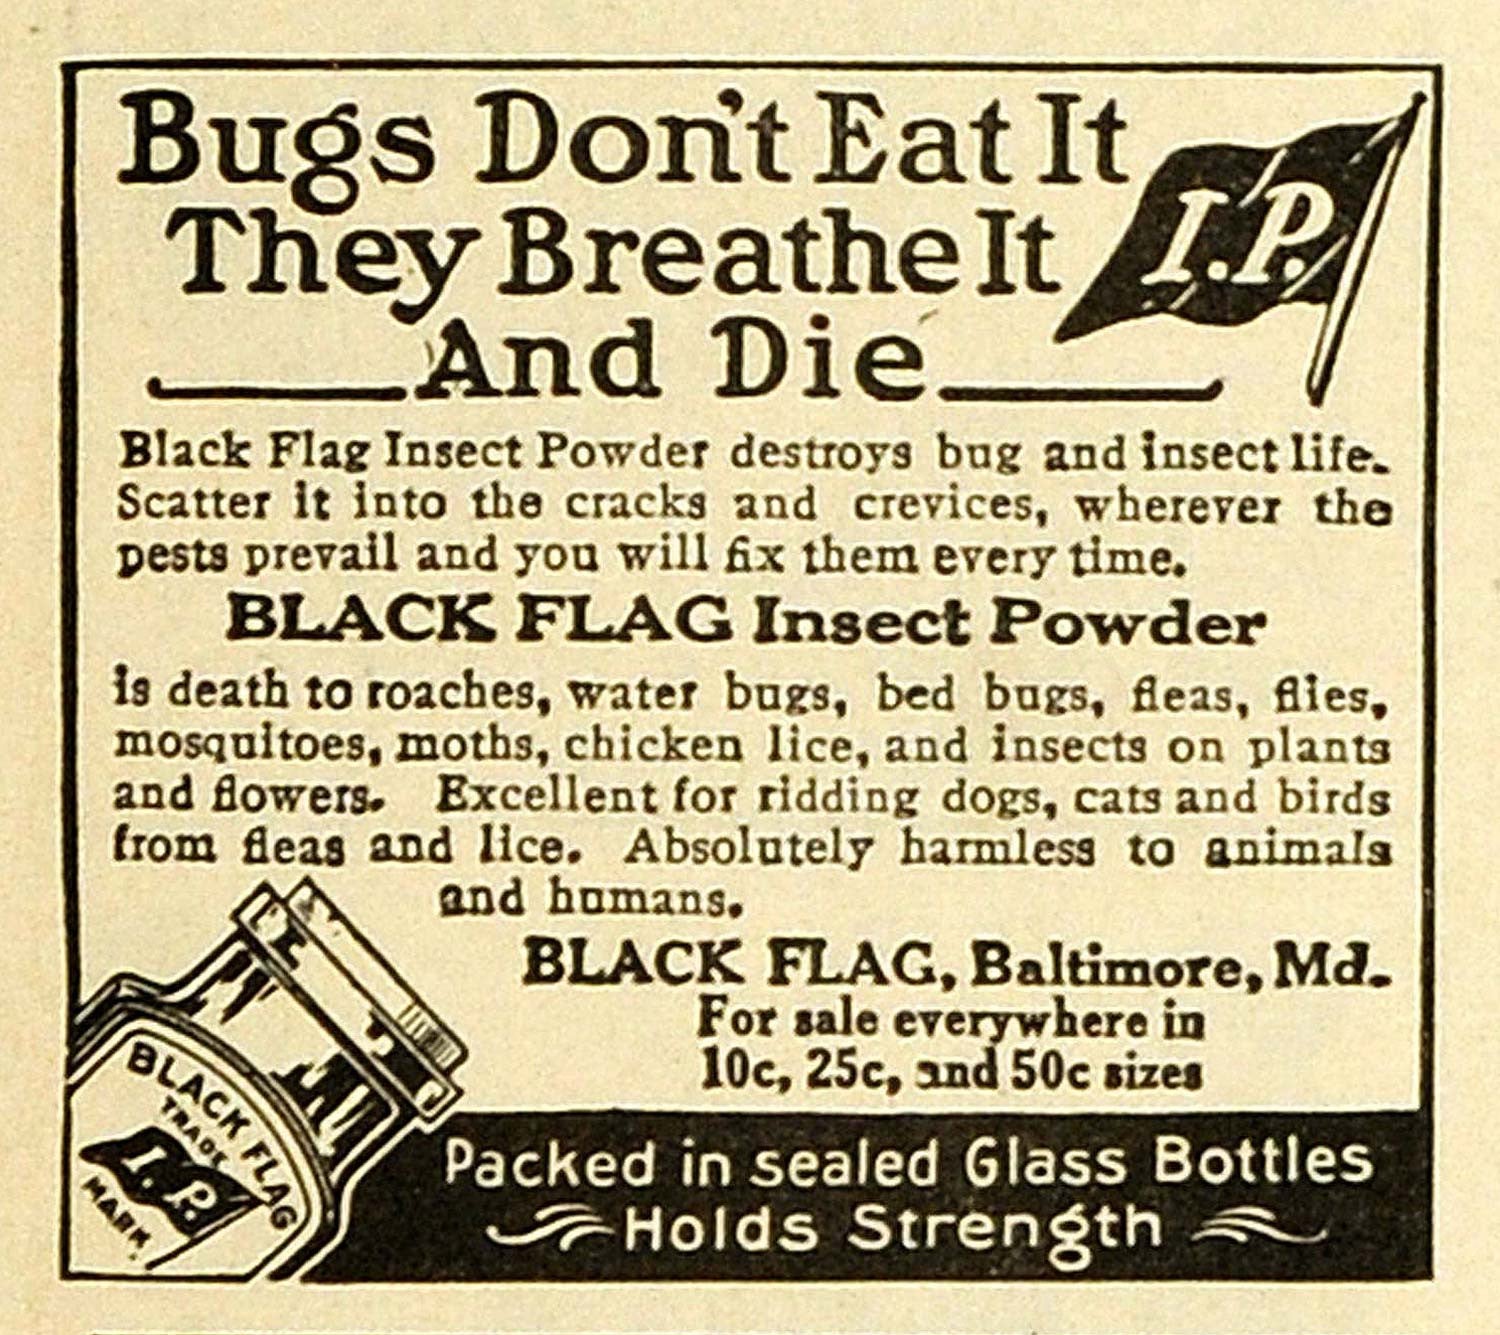 1918 Ad Black Flag Insect Powder Insecticide Pesticide Products Baltimore TMP2 - Period Paper
